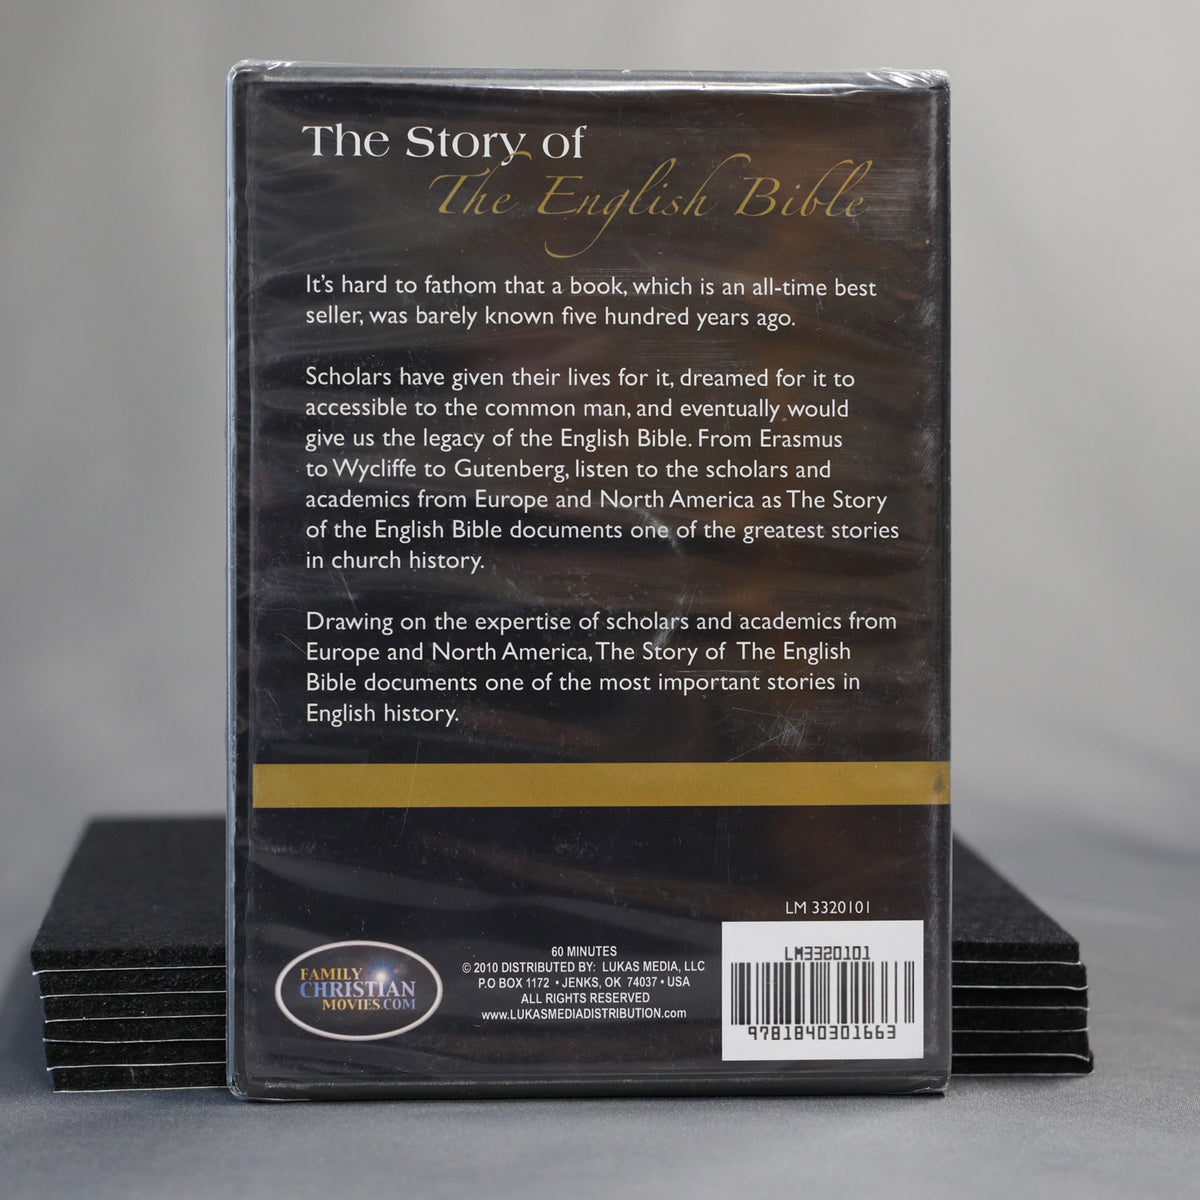 The Story of the English Bible (DVD)